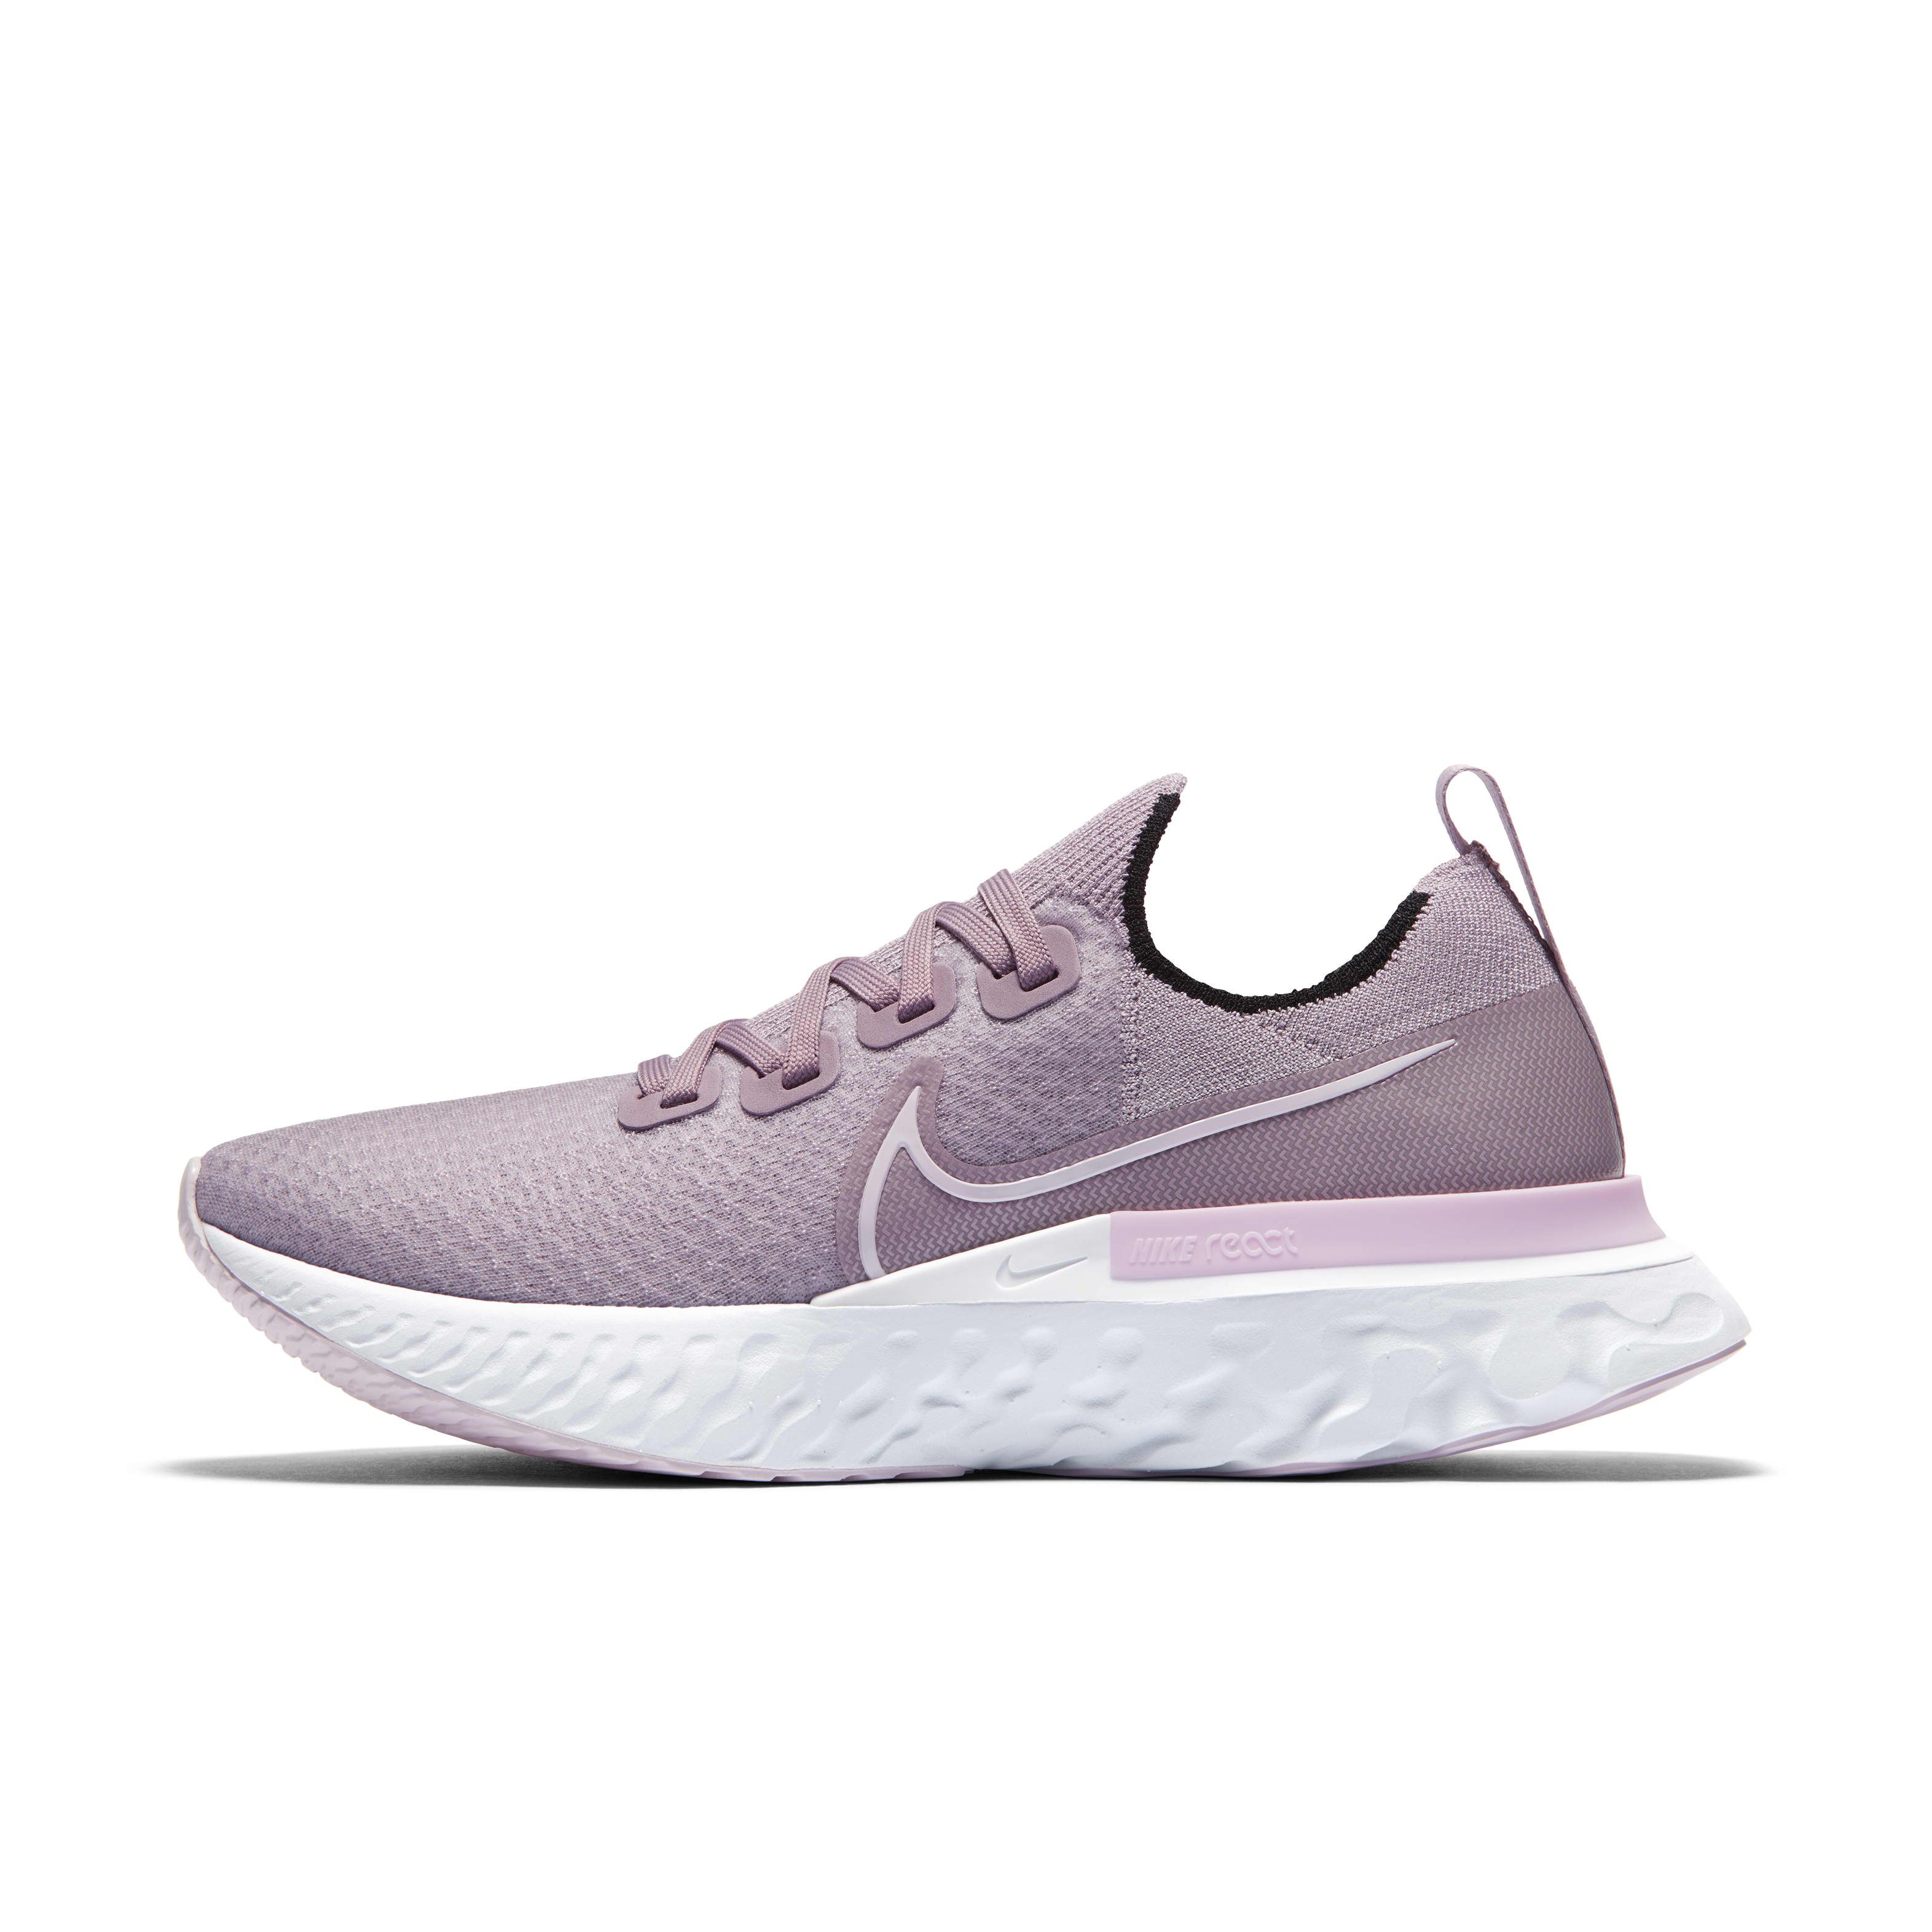 nike running shoes black friday sale